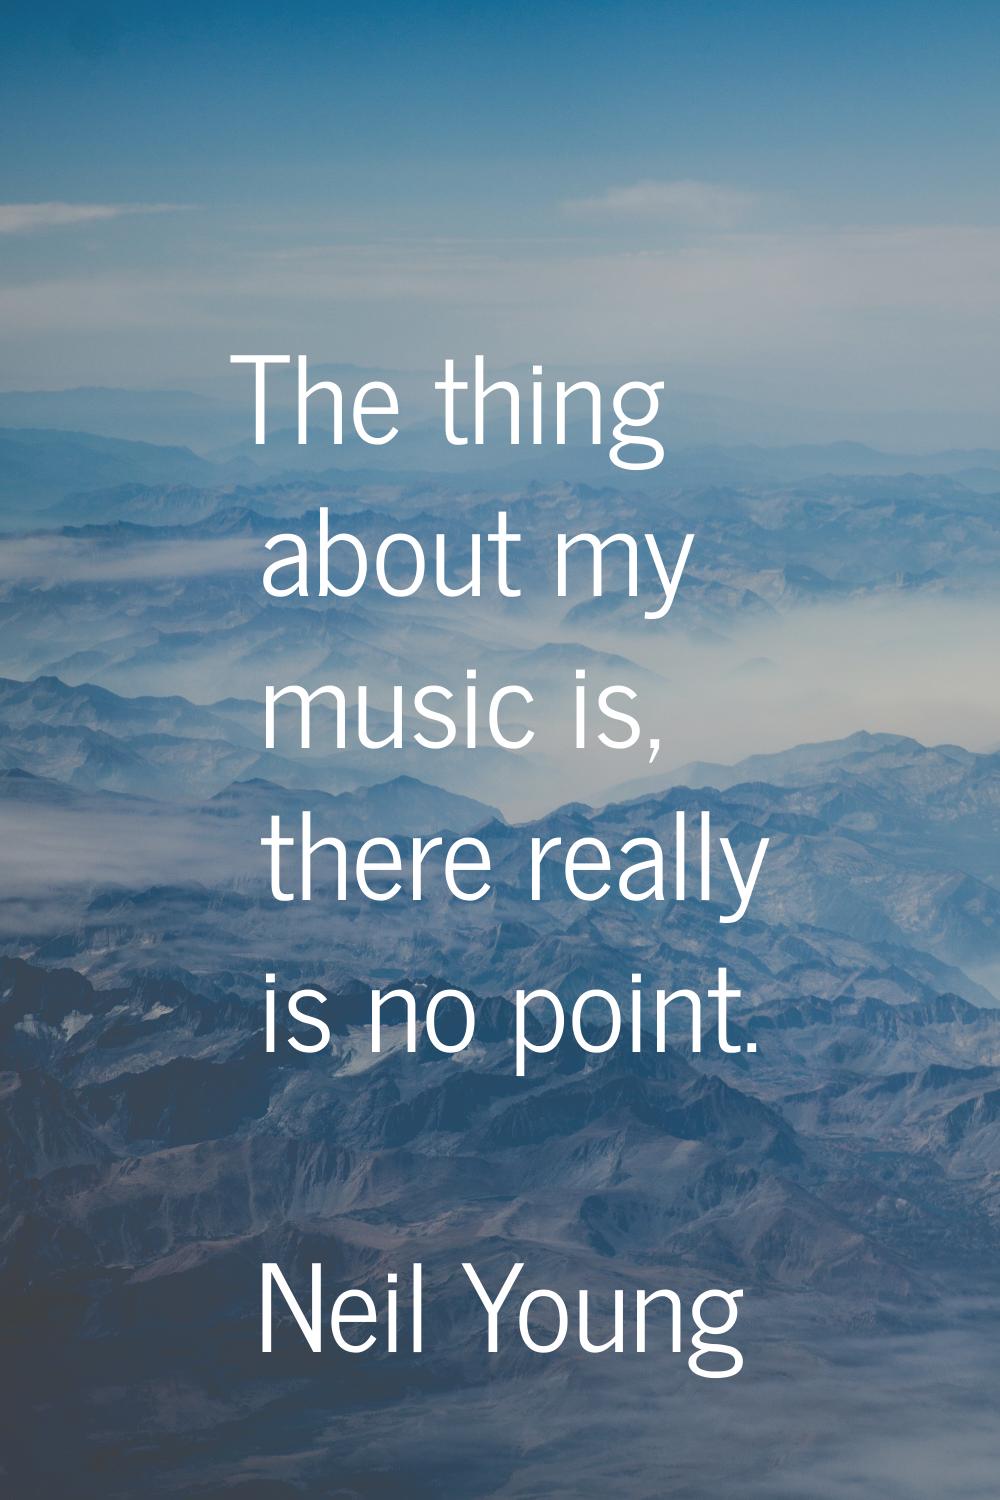 The thing about my music is, there really is no point.